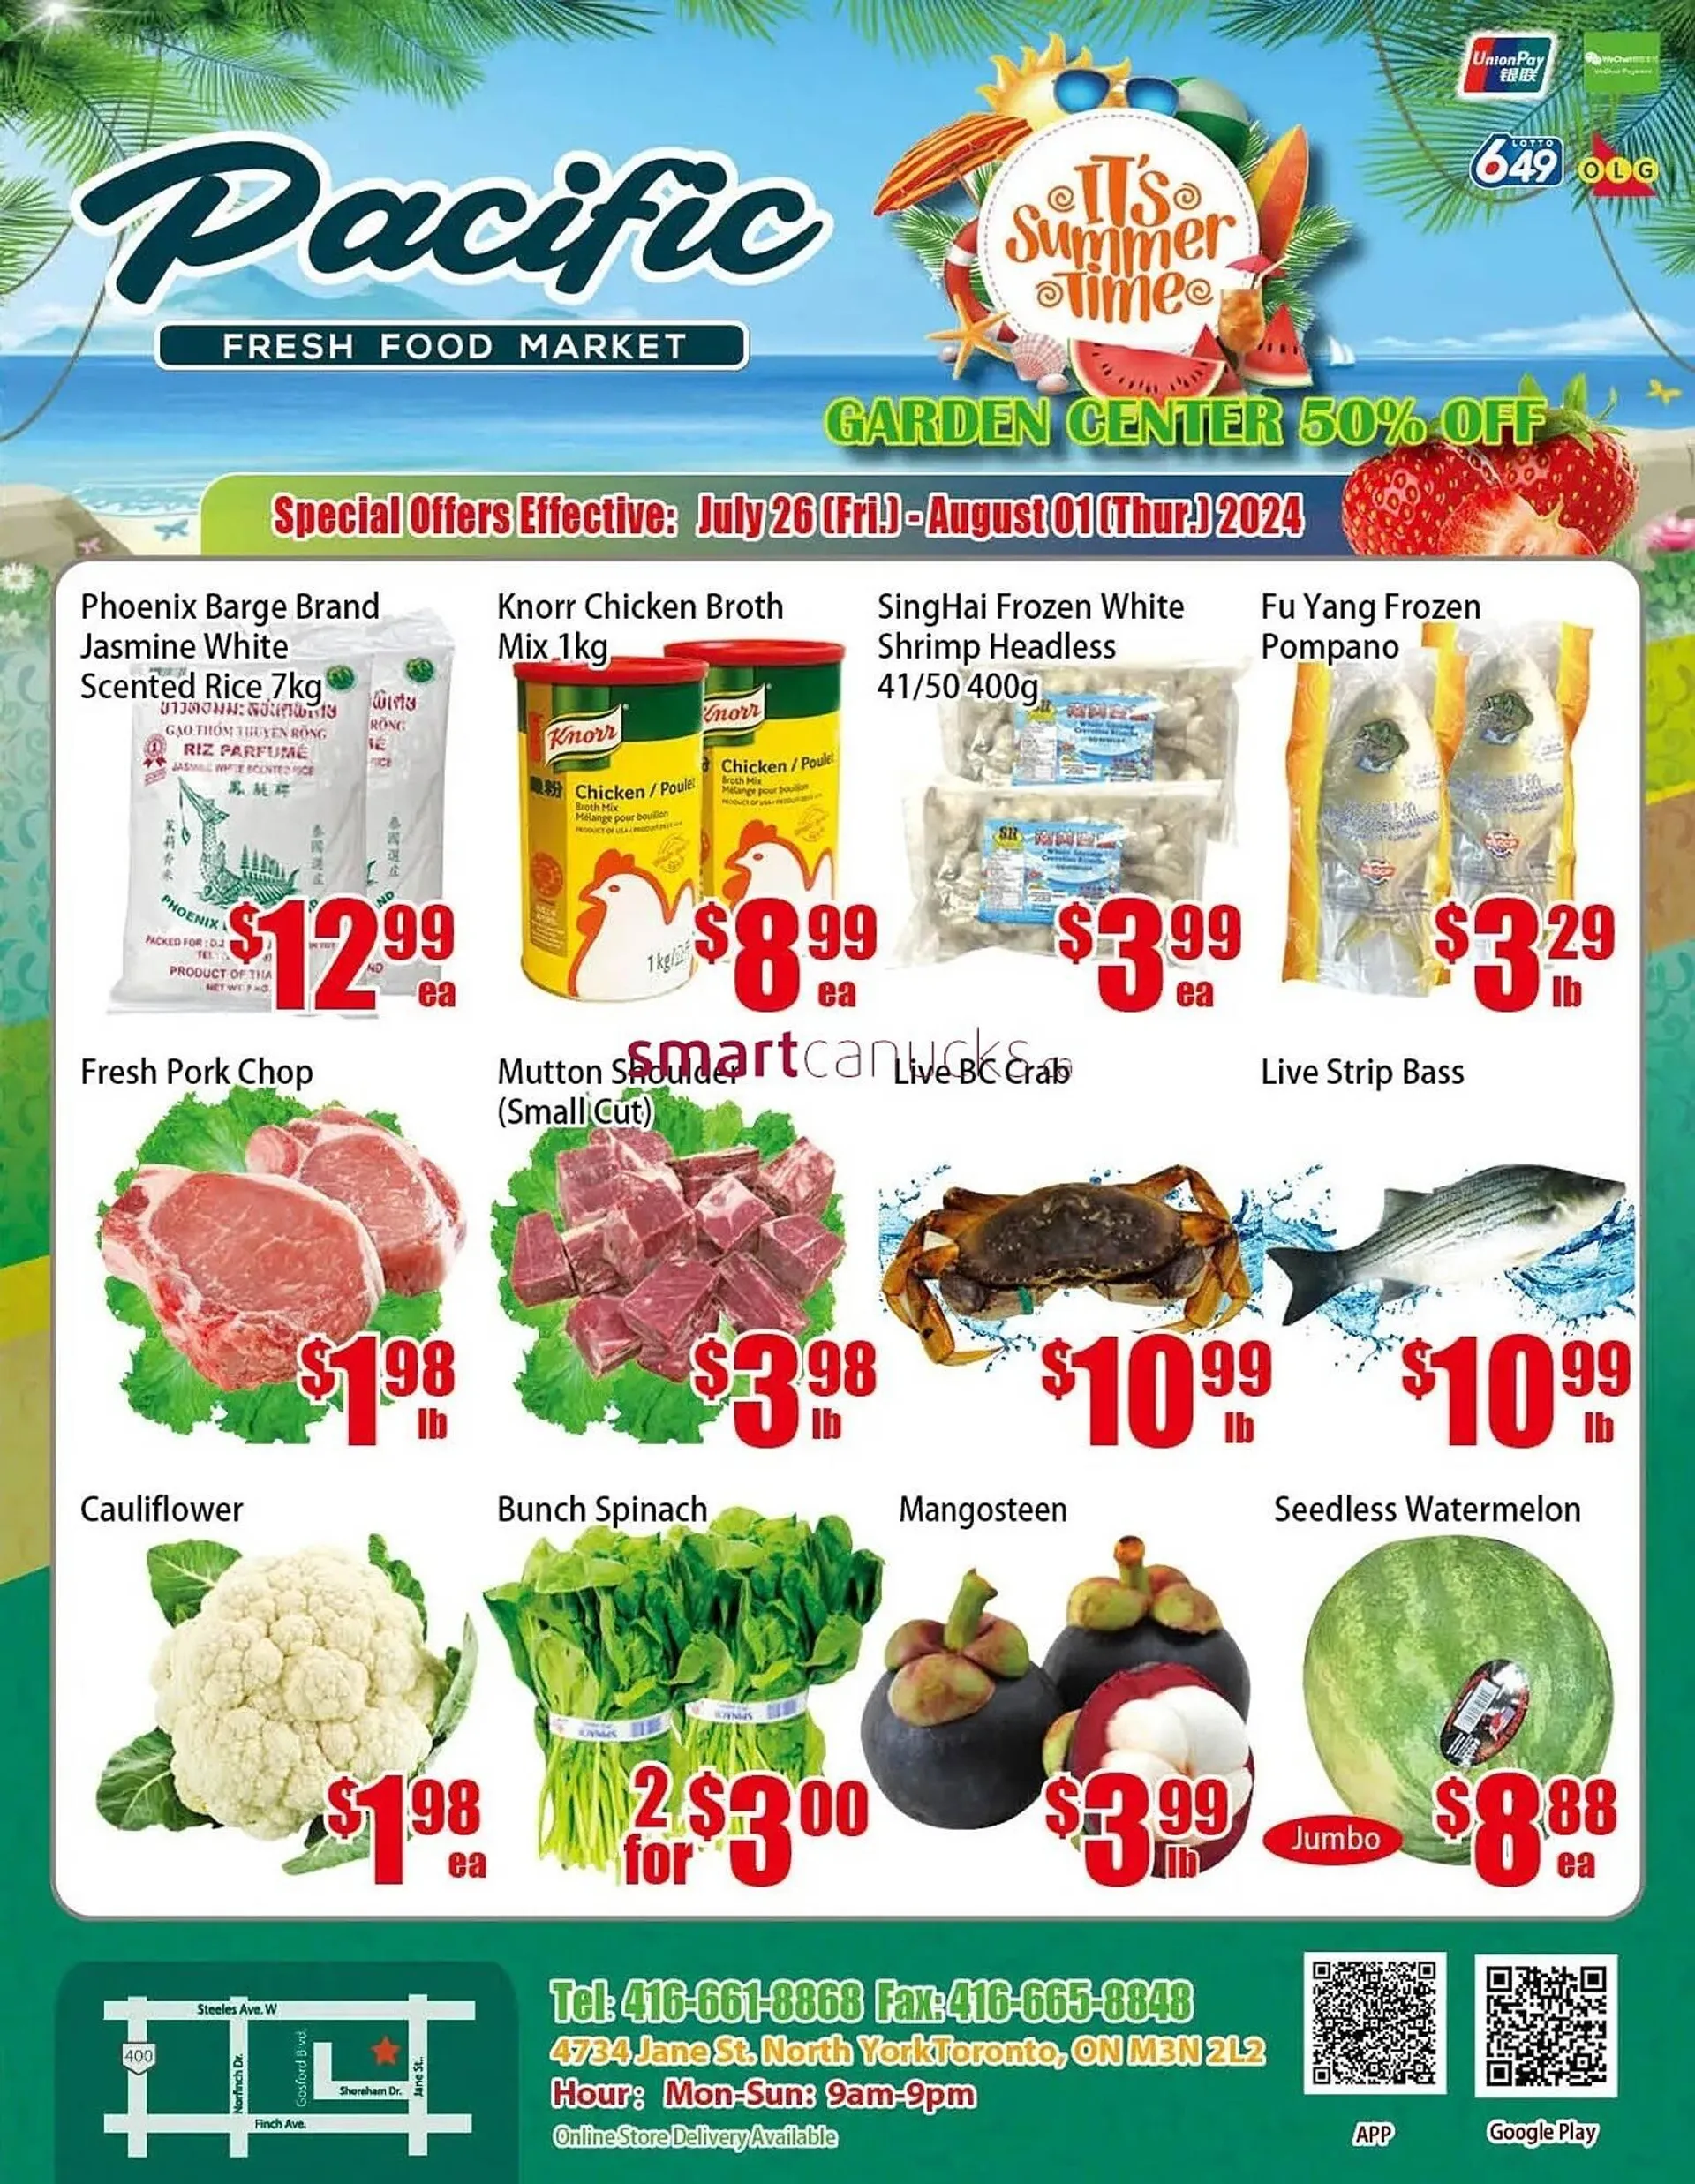 New Pacific Supermarket flyer - 1